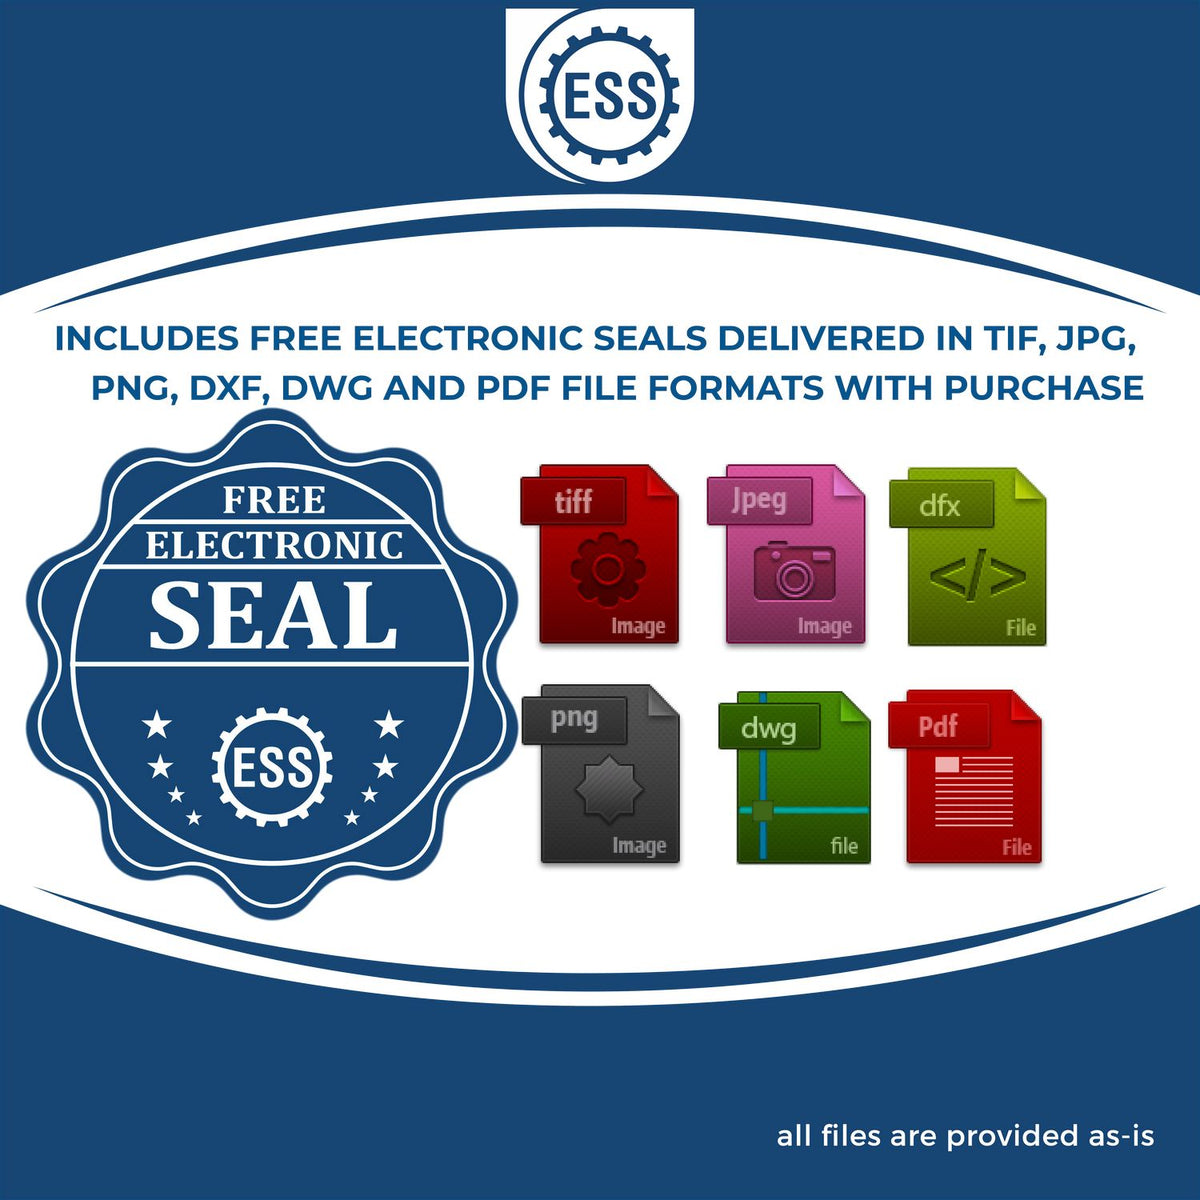 An infographic for the free electronic seal for the Heavy Duty Cast Iron Montana Geologist Seal Embosser illustrating the different file type icons such as DXF, DWG, TIF, JPG and PNG.